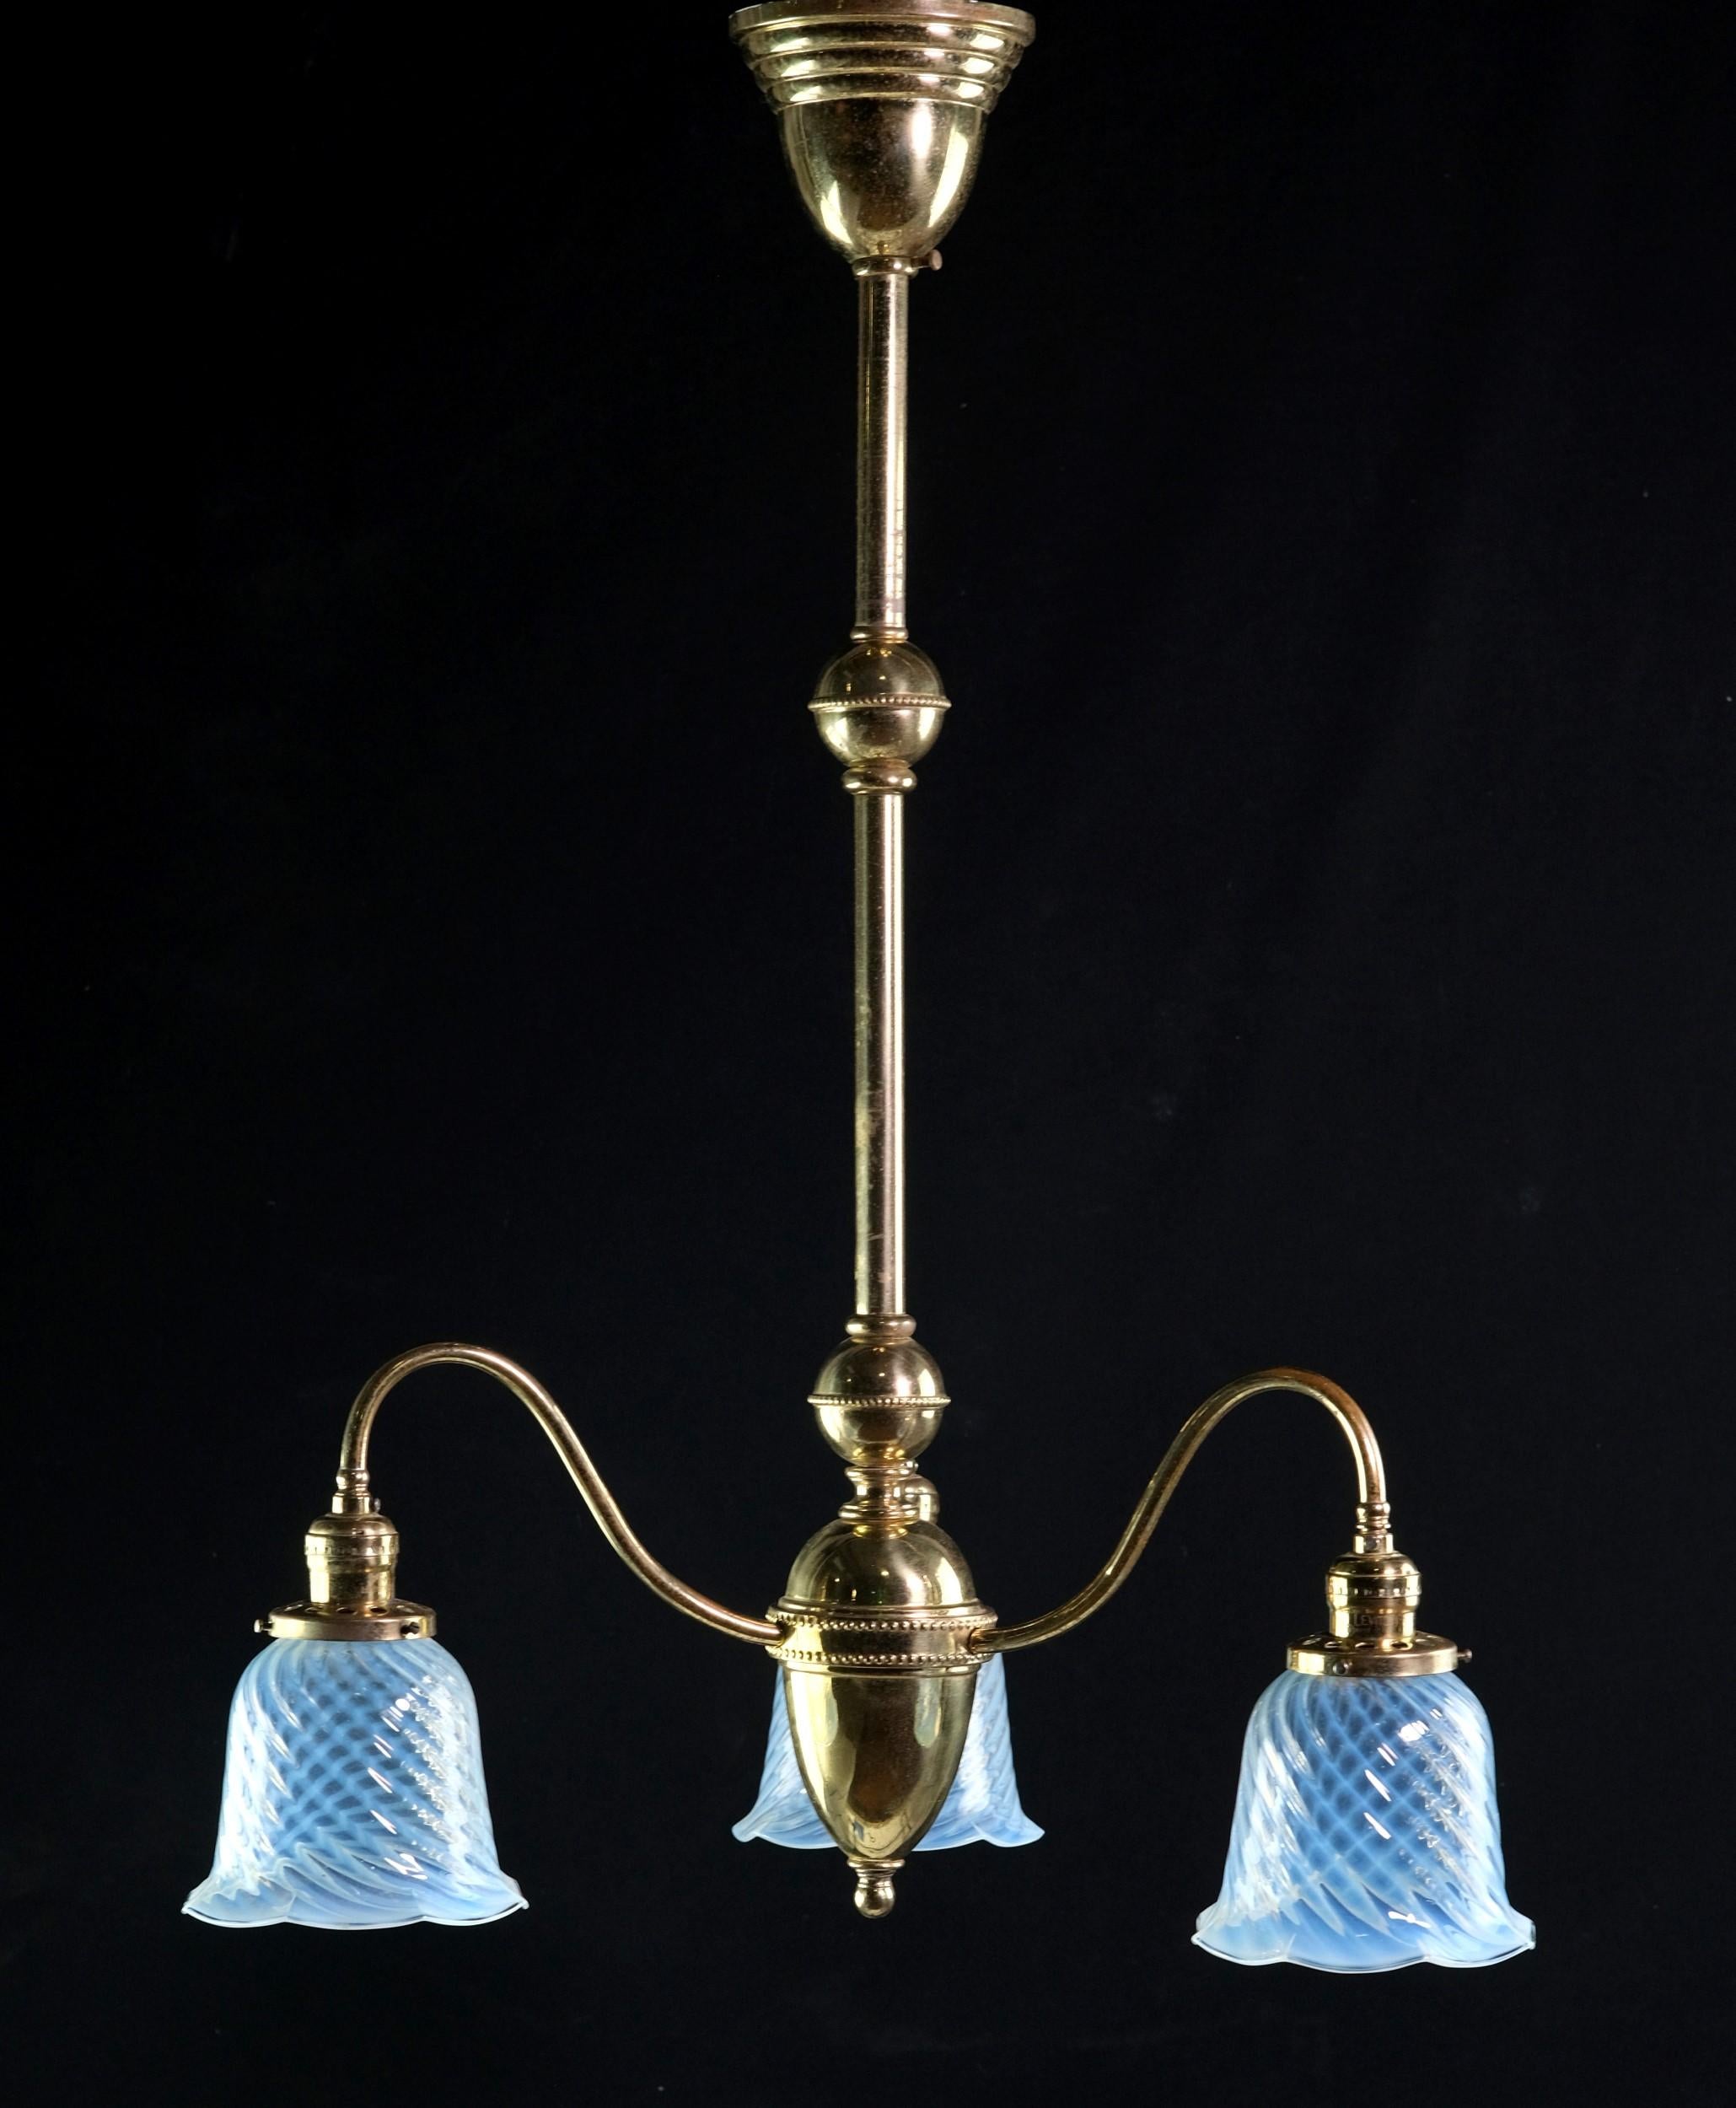 Turn of the century elegant brass chandelier featuring three down-lights with gas opalescent swirled glass shades. This pendant light has a brass canopy, pole and curved arms with a warm natural patina and the shades are hand-blown. These original